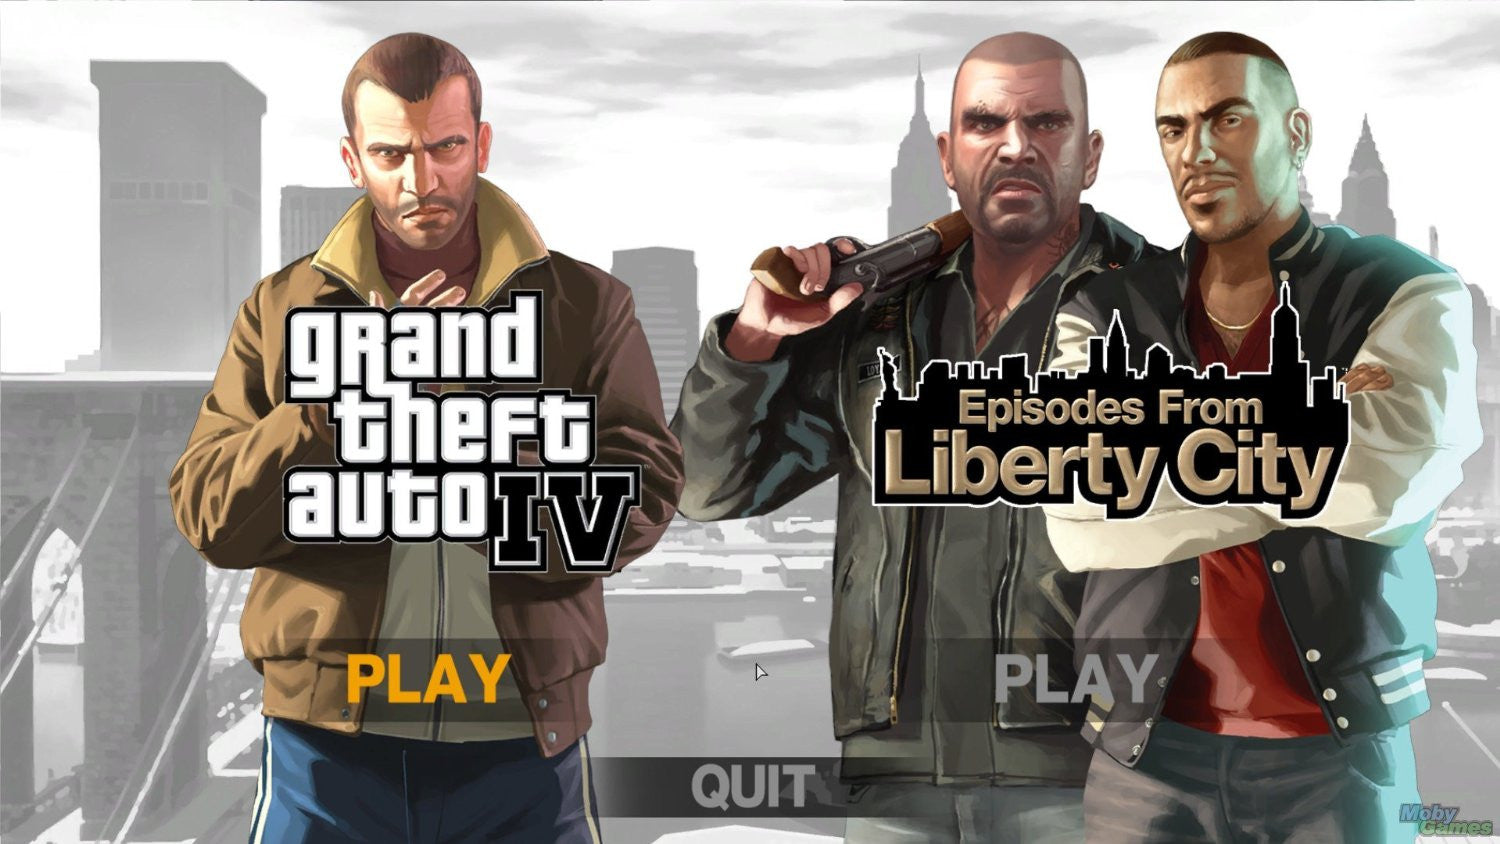 MAX PAYNE 3 /Grand  Theft Auto IV & Episodes from Liberty City: The Complete Edition